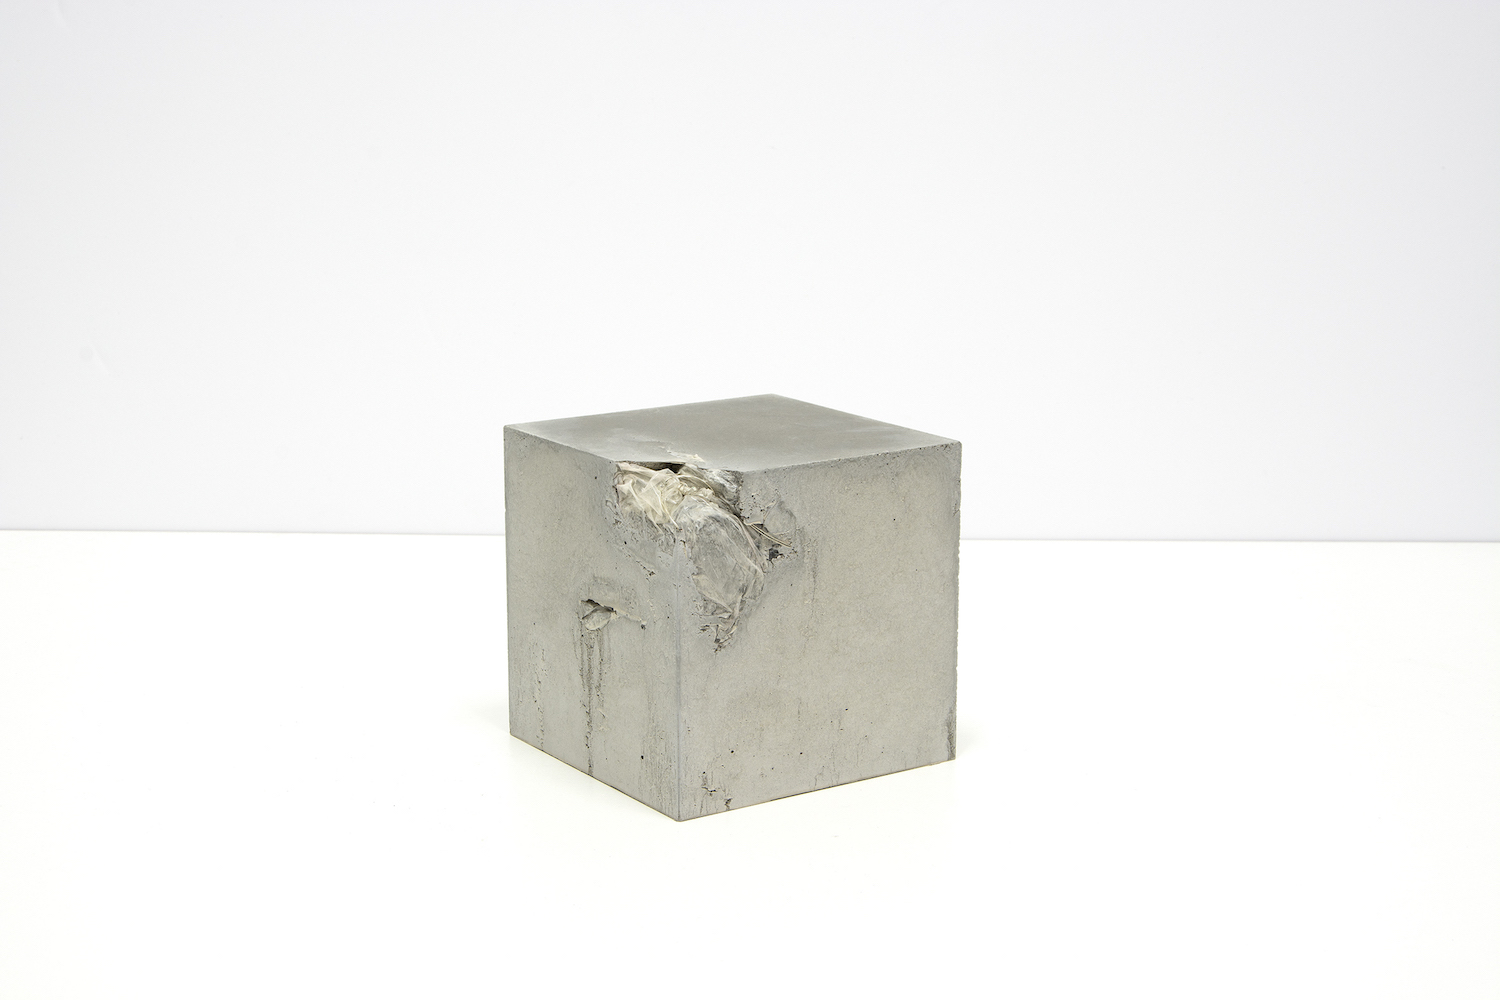  Michael John Whelan Inclusions (LED party balloon) 2018 Cast concrete cube containing a LED party balloon retrieved from the Persian Gulf. 15x15x15 cm Unique 